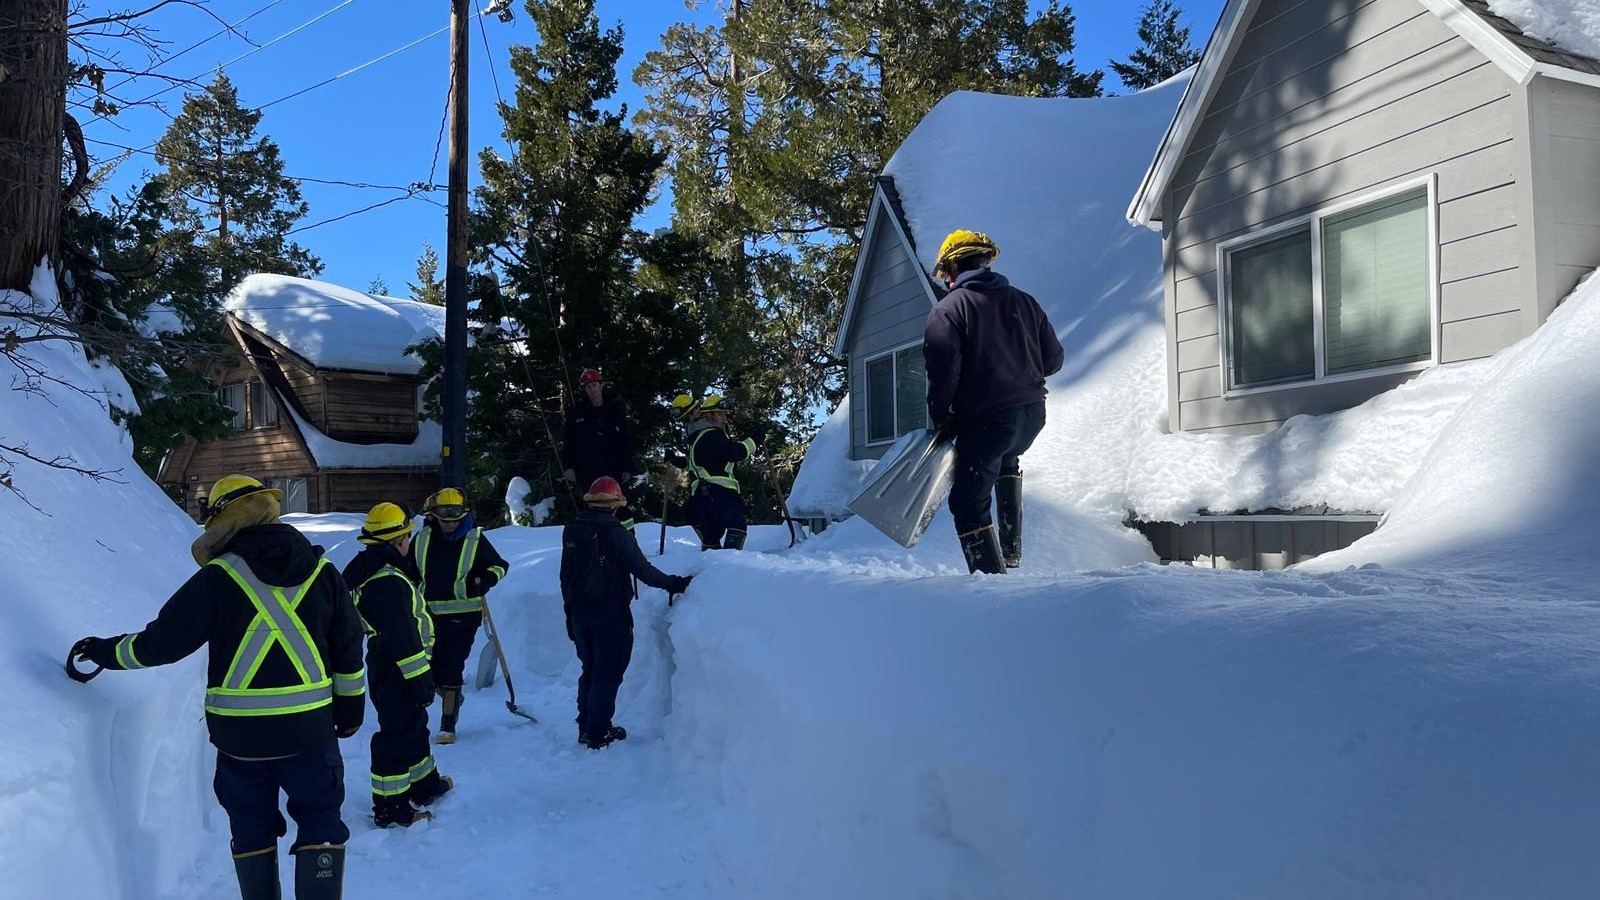 Help us!!': Crews work to get supplies to stranded residents after severe  snowstorms - ABC News